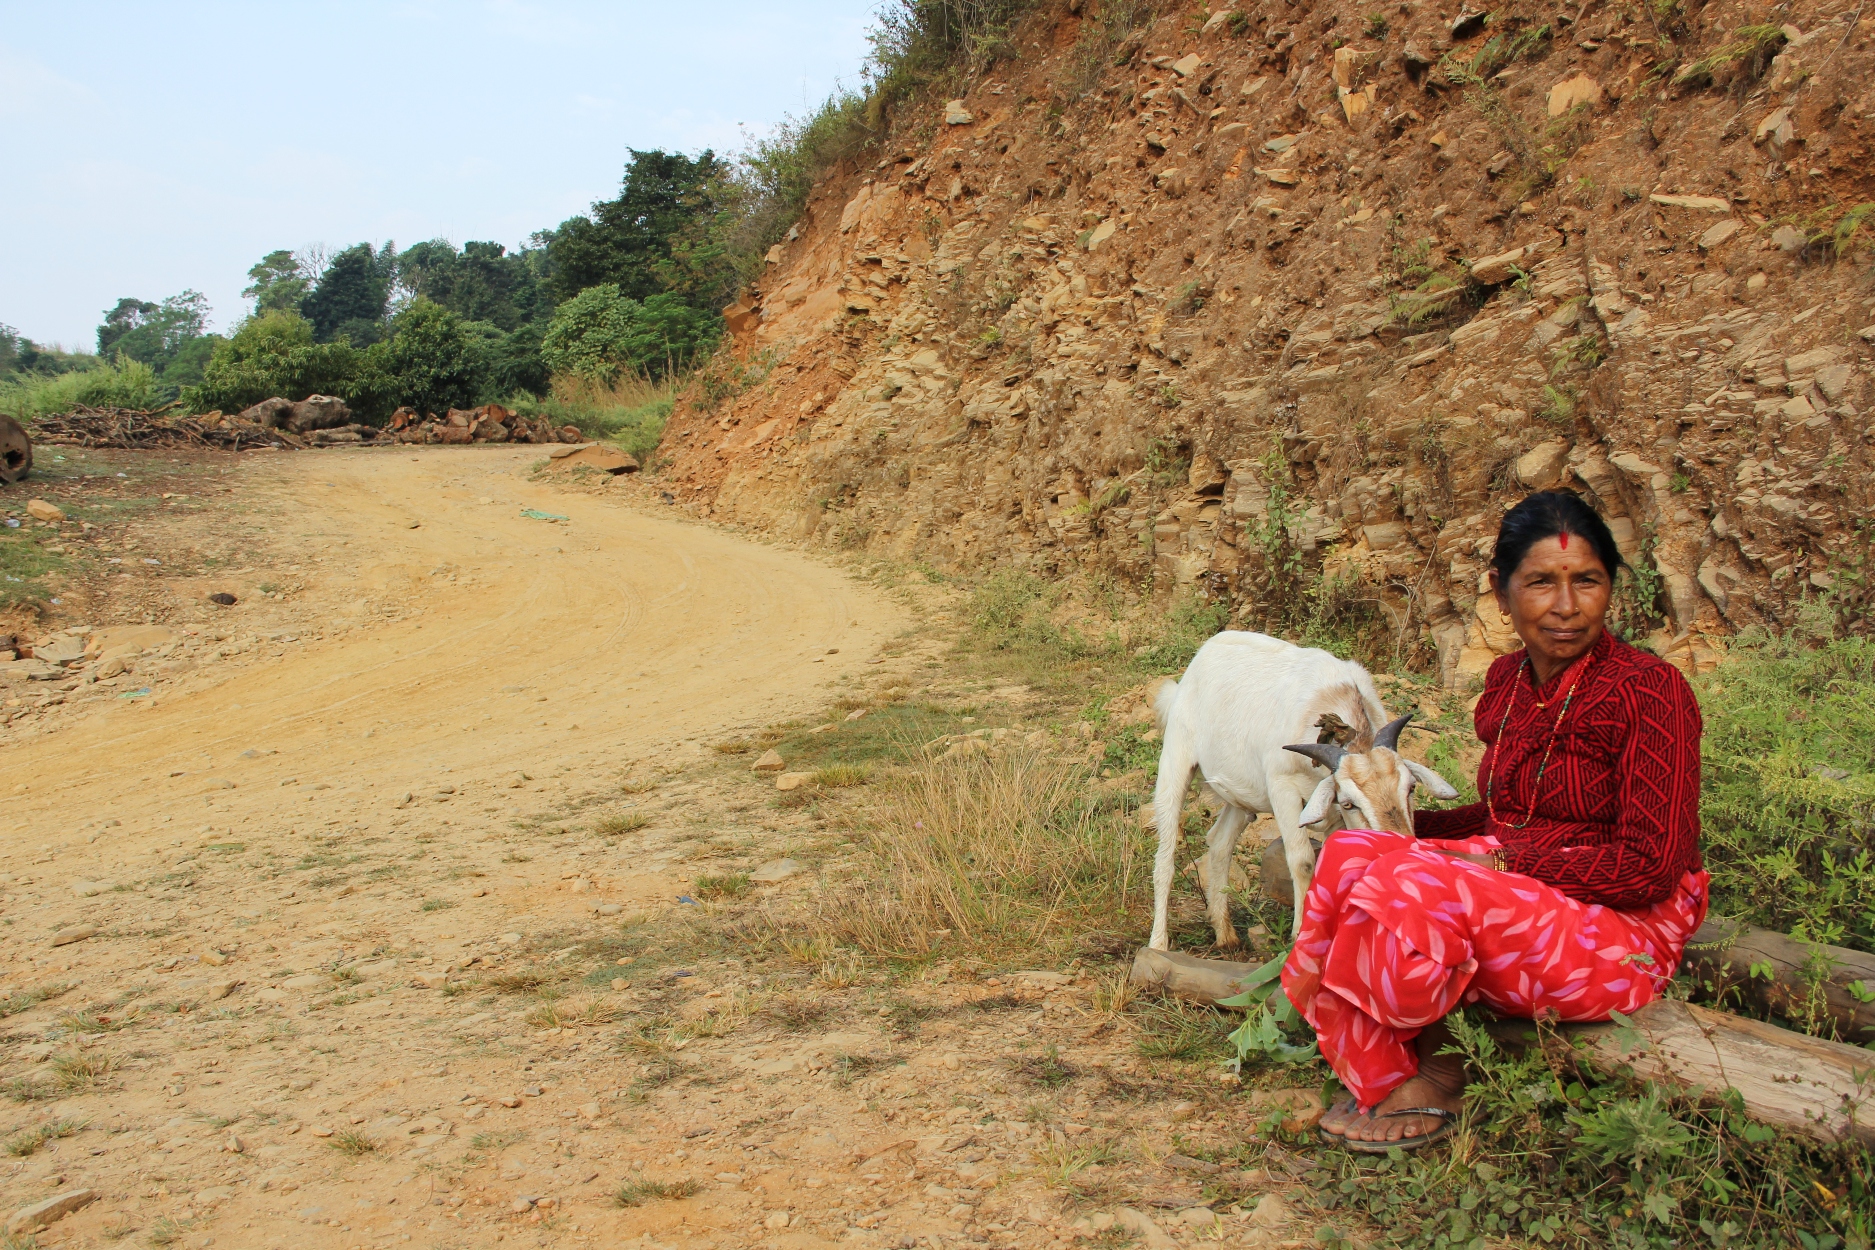 Devi Pokharel of Phalam Khani waits by the side of the road with her goat, for a crowded bus to take them the dusty 150km to Kathmandu. Normally her whole family returns to her village for the festival. “Now my house is gone, and I have to get to the city because no-one will come here,” she added. “It is far, and very tiring for me. The fuel problem means it is expensive to travel now and there is very little room on the bus. Without cooking gas in the city I have to pay someone else 2000 rupees (US$20) to butcher and prepare the goat for the feast. If others would have come here, we could have done everything ourselves.”